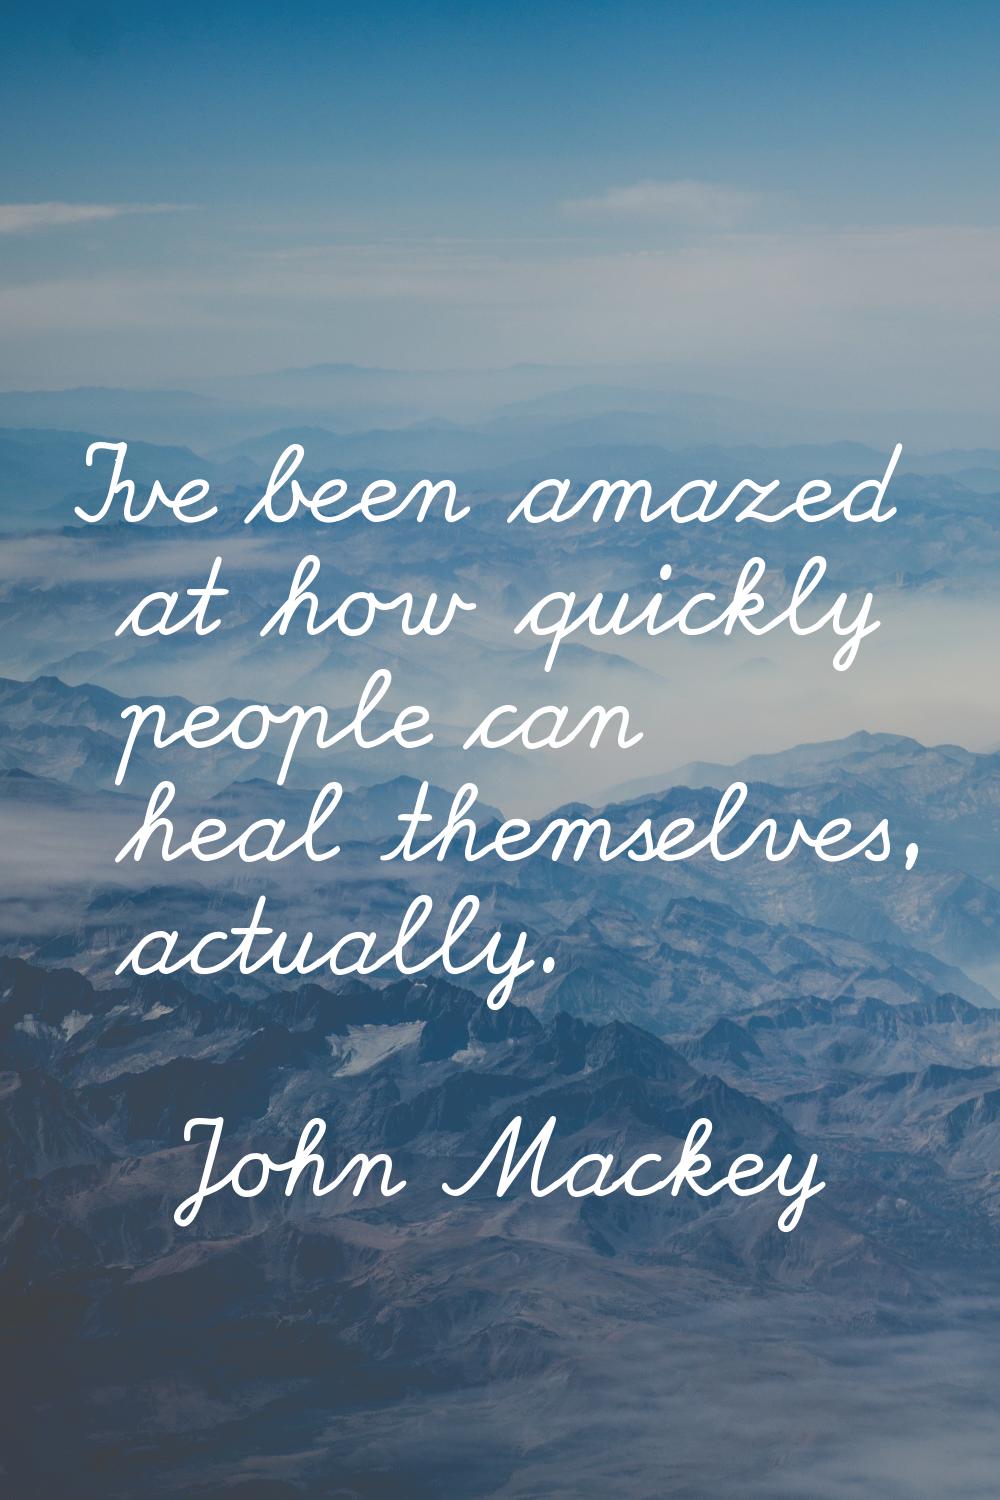 I've been amazed at how quickly people can heal themselves, actually.